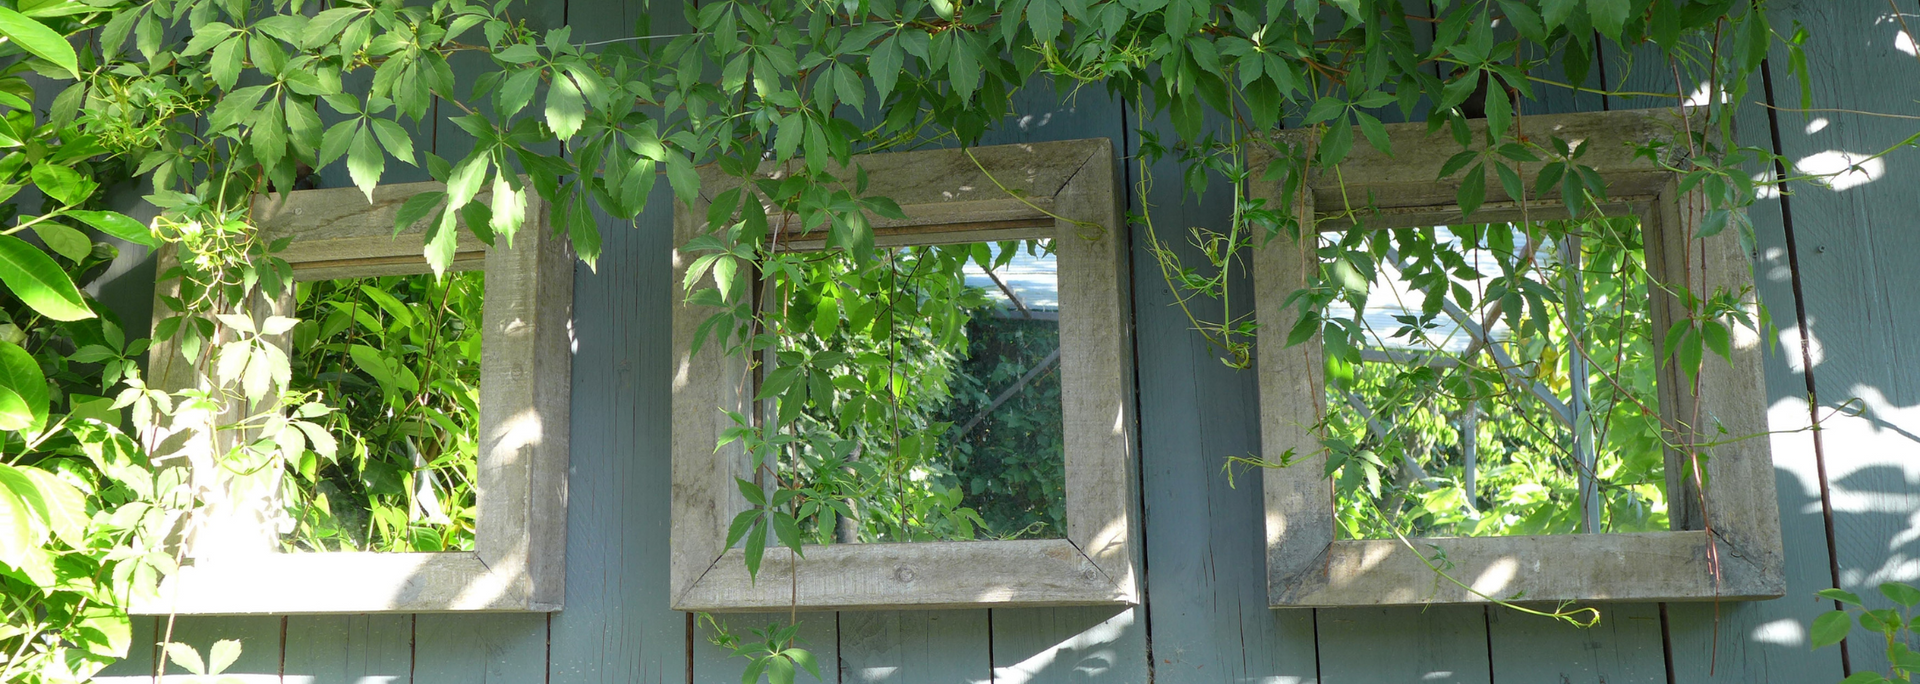 Picture of a mirror in a garden.
